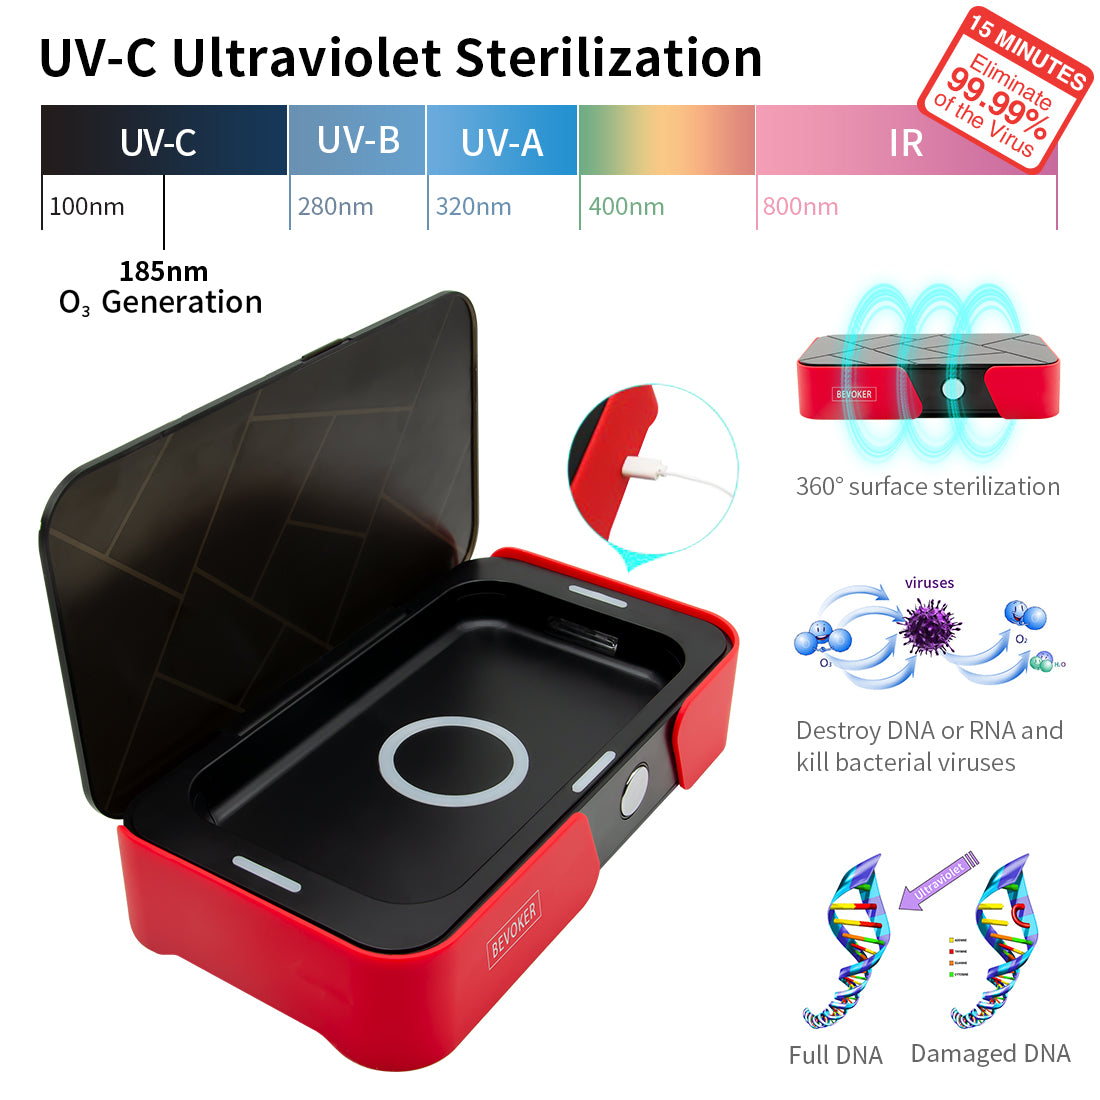 BEVOKER UV Sanitizer Cellphone Cleaner Sterilizer Box Portable Mobile Phone Ozone Disinfection with Wireless Charger Disinfector for All iPhone Andriod Cellphone